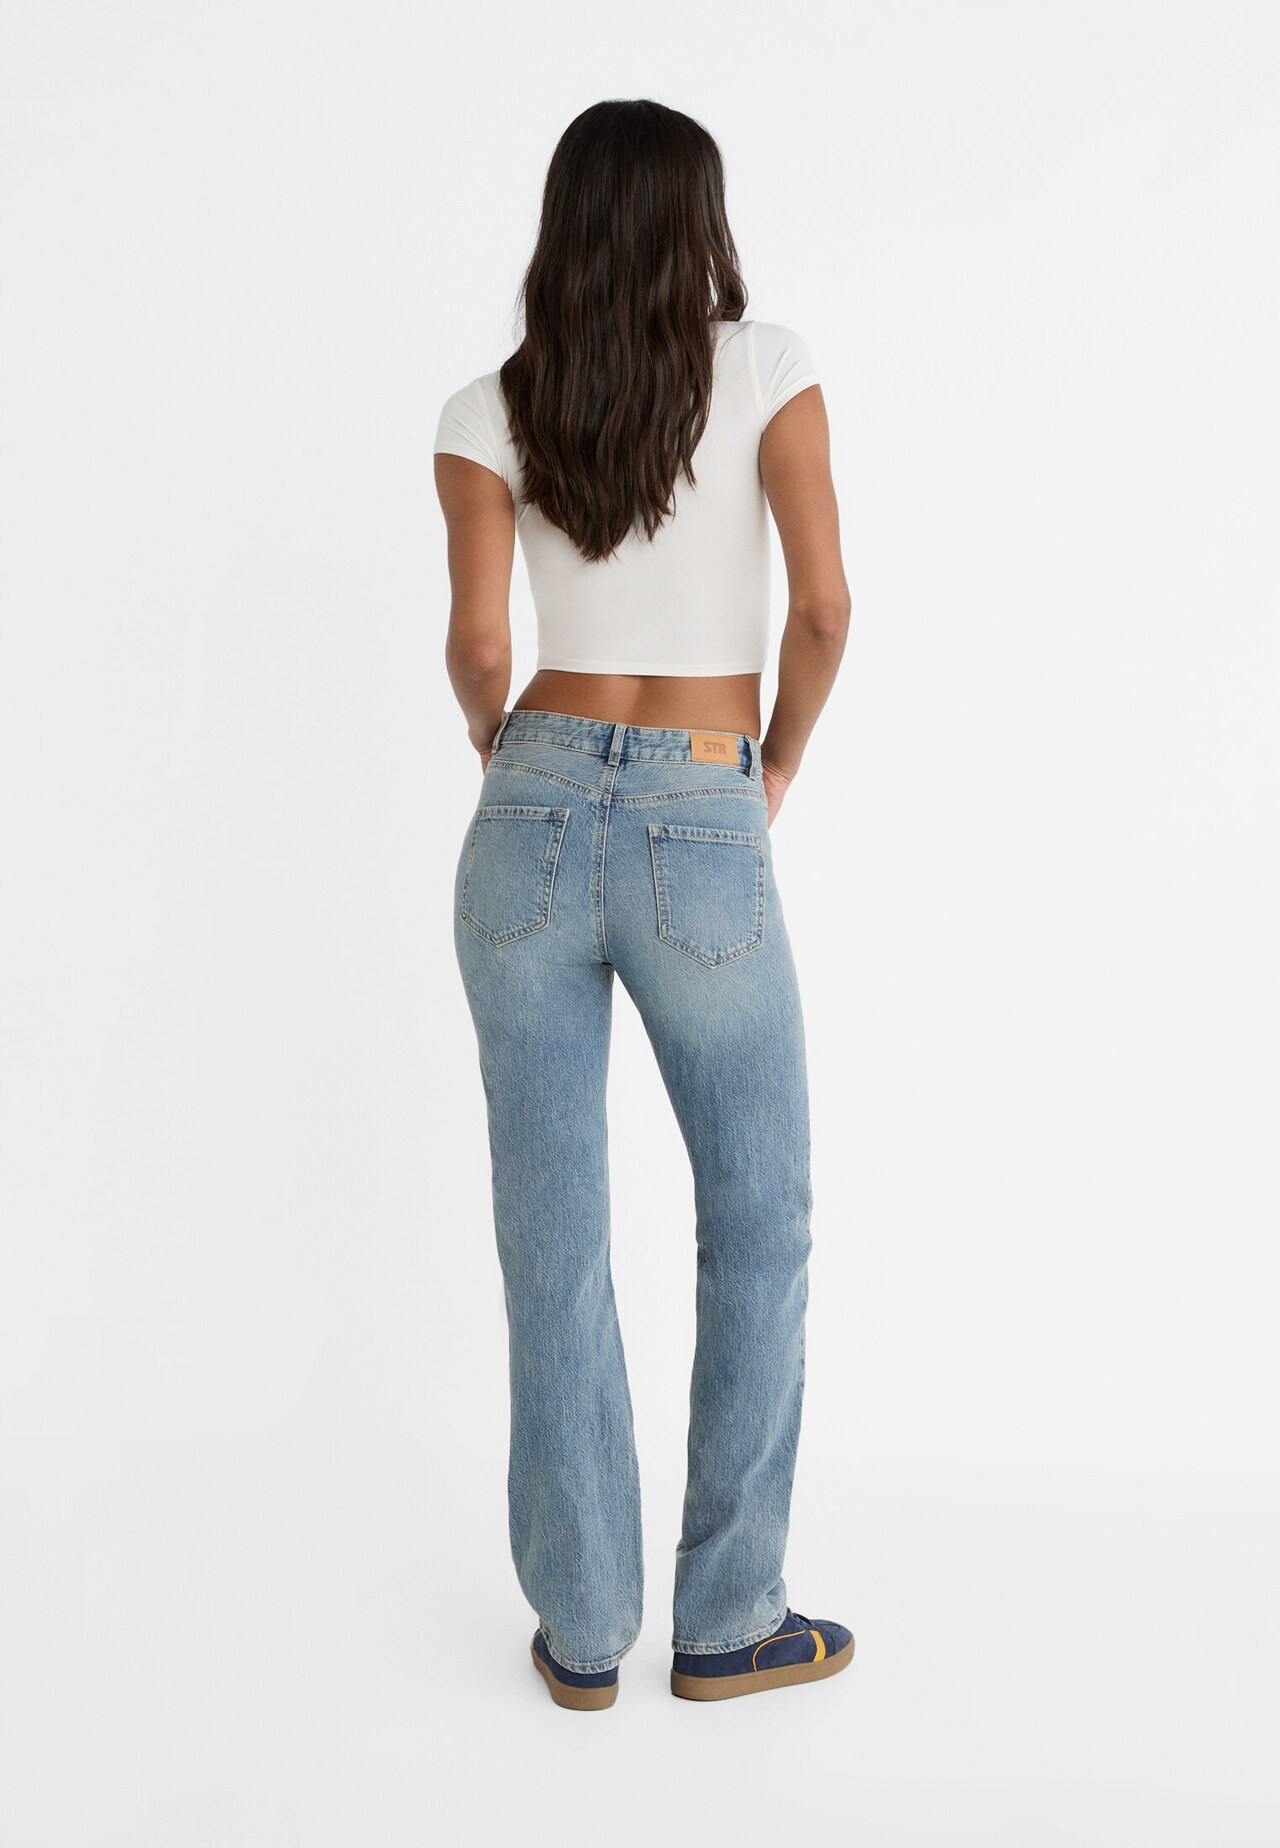 Straight-fit jeans - Women's fashion